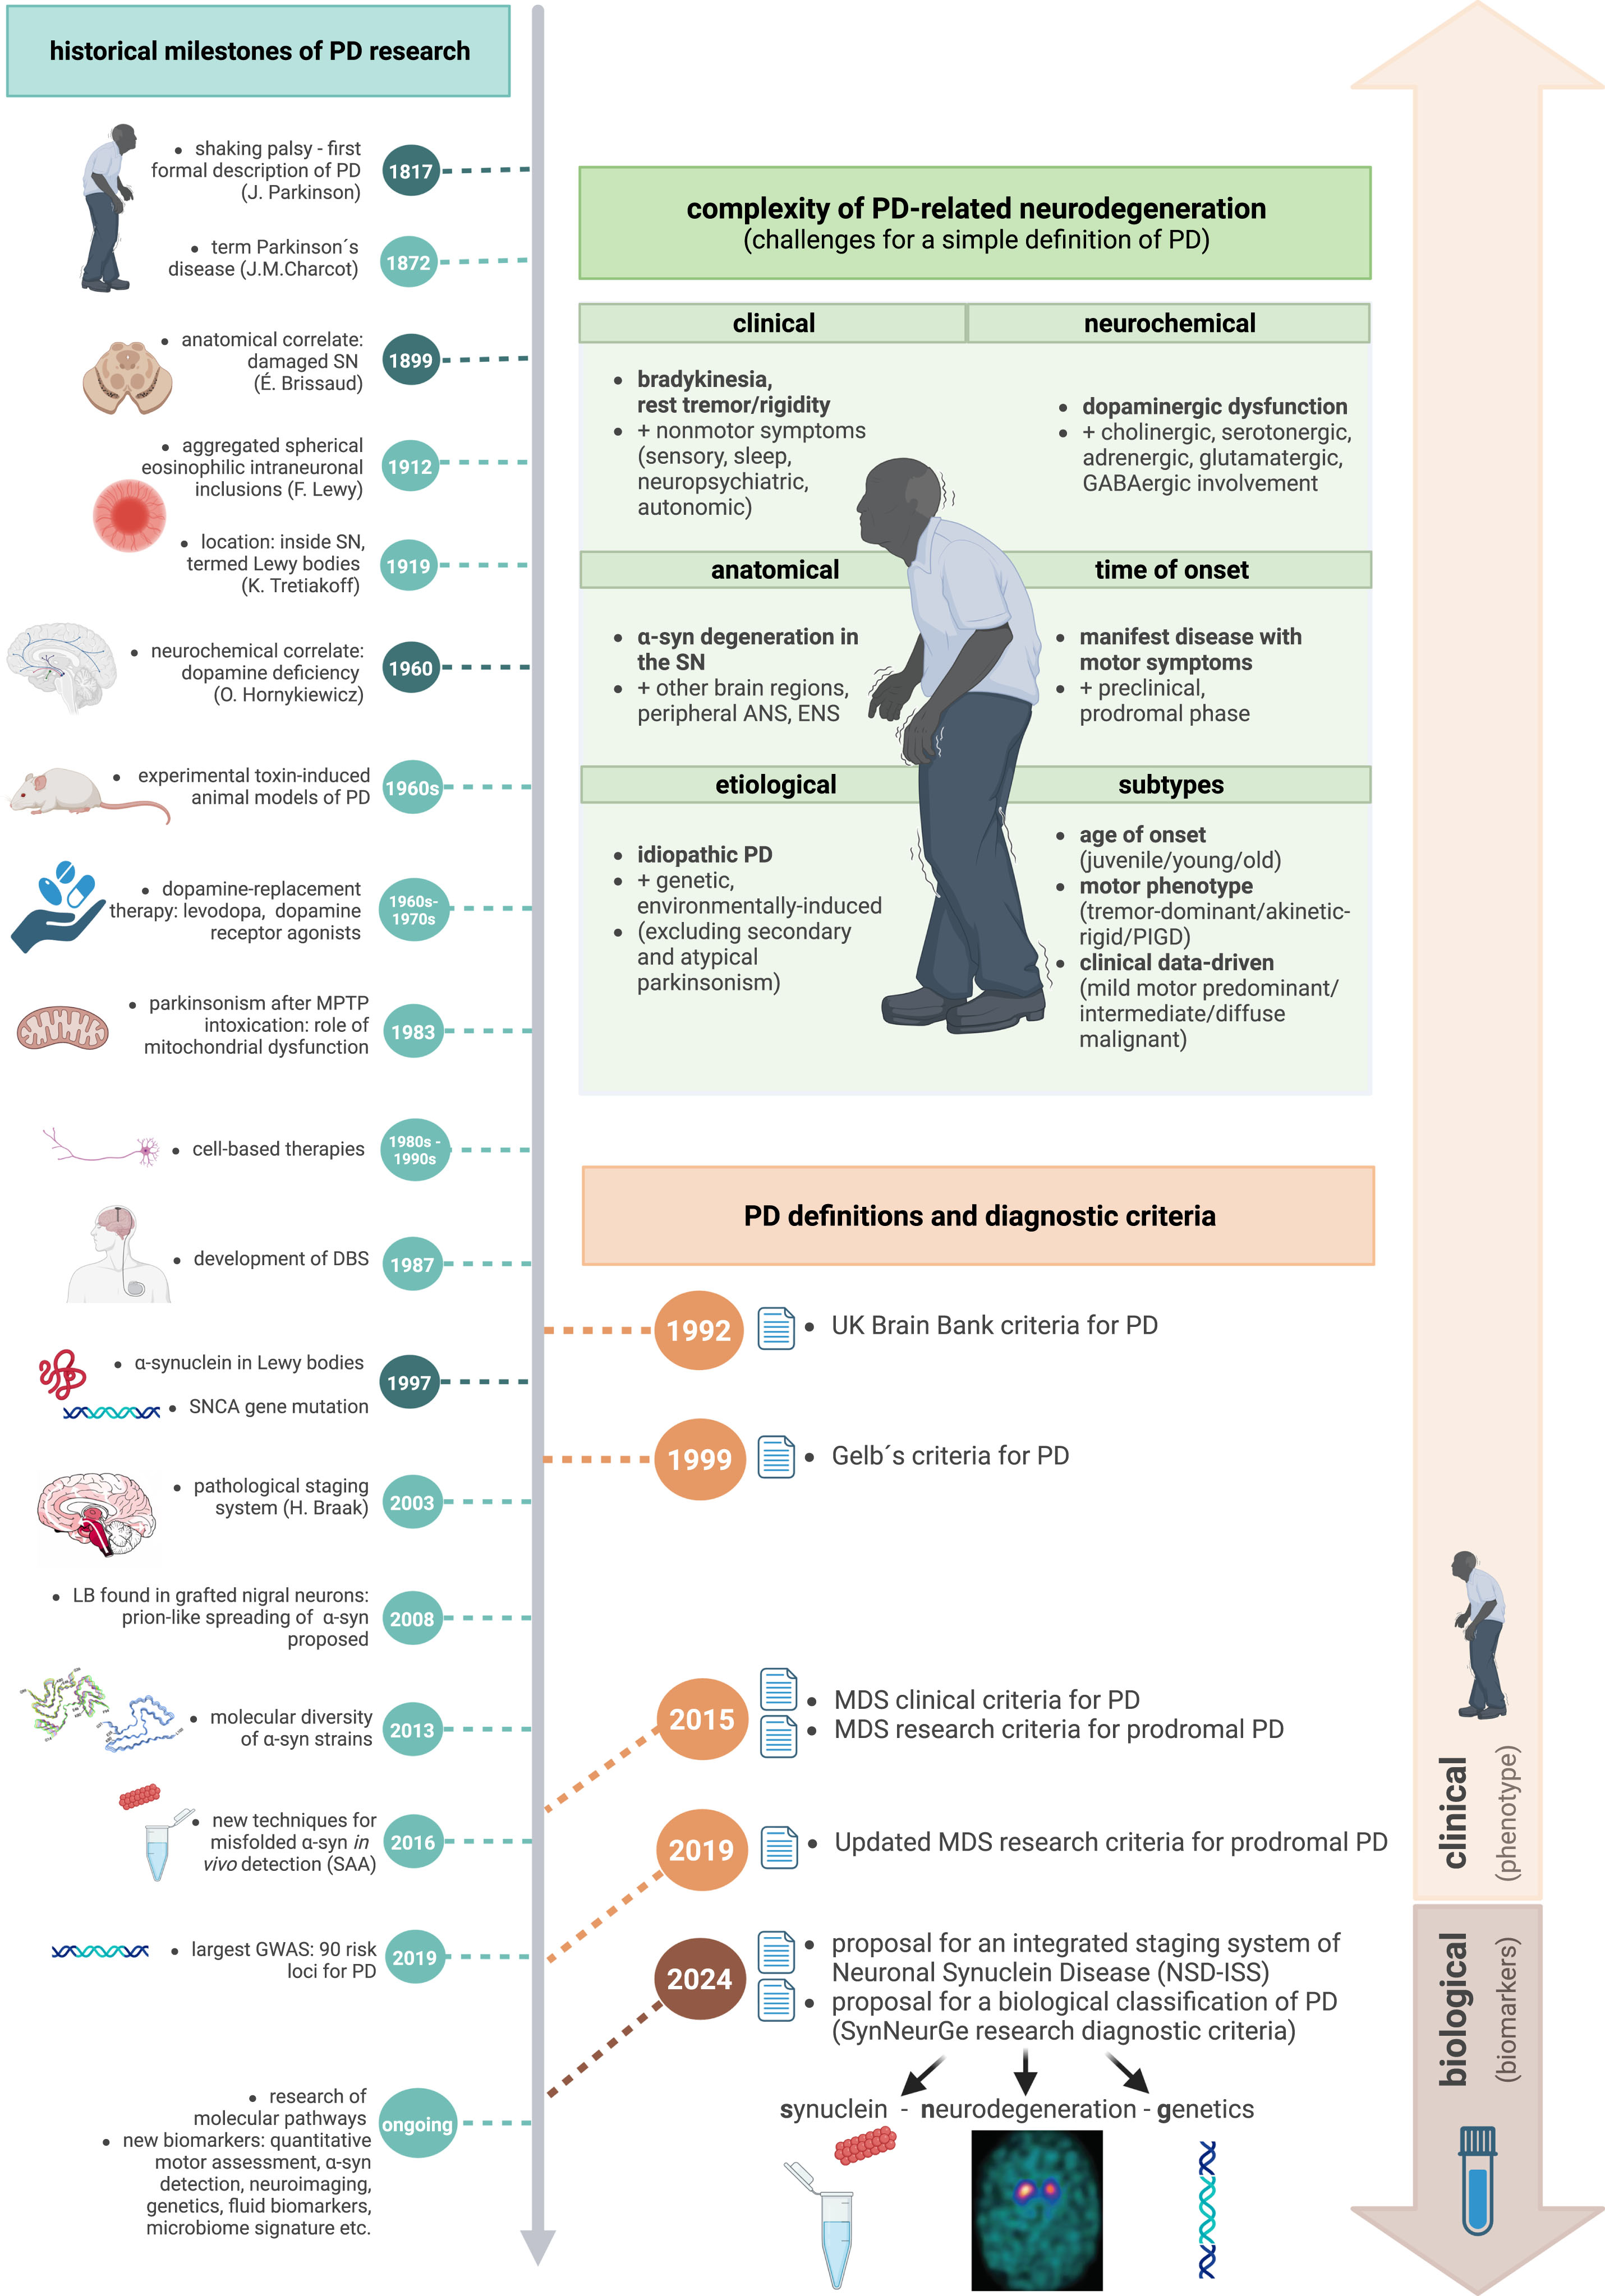 
Defining Parkinson’s disease –historical milestones, complexity of PD-related neurodegeneration and corresponding evolution of diagnostic criteria and definitions. PD, Parkinson’s disease; SN, substantia nigra, MPTP, 1-methyl-4-phenyl-1,2,5,6-tetrahydropyridine; DBS, deep brain stimulation; SNCA, synuclein alpha gene; LB, Lewy bodies; α-syn, α-synuclein; SAA, seed amplification assays; GWAS, genome-wide association study; ANS, autonomic nervous system; ENS, enteric nervous system; GABA, gamma-aminobutyric acid; PIGD, postural instability and gait disturbance; UK, United Kingdom; MDS, International Parkinson and Movement Disorders Society; SynNeurGe, synuclein-neurodegeneration-genetics; NSD-ISS, neuronal α-synuclein disease integrated staging system. Created with BioRender.com.